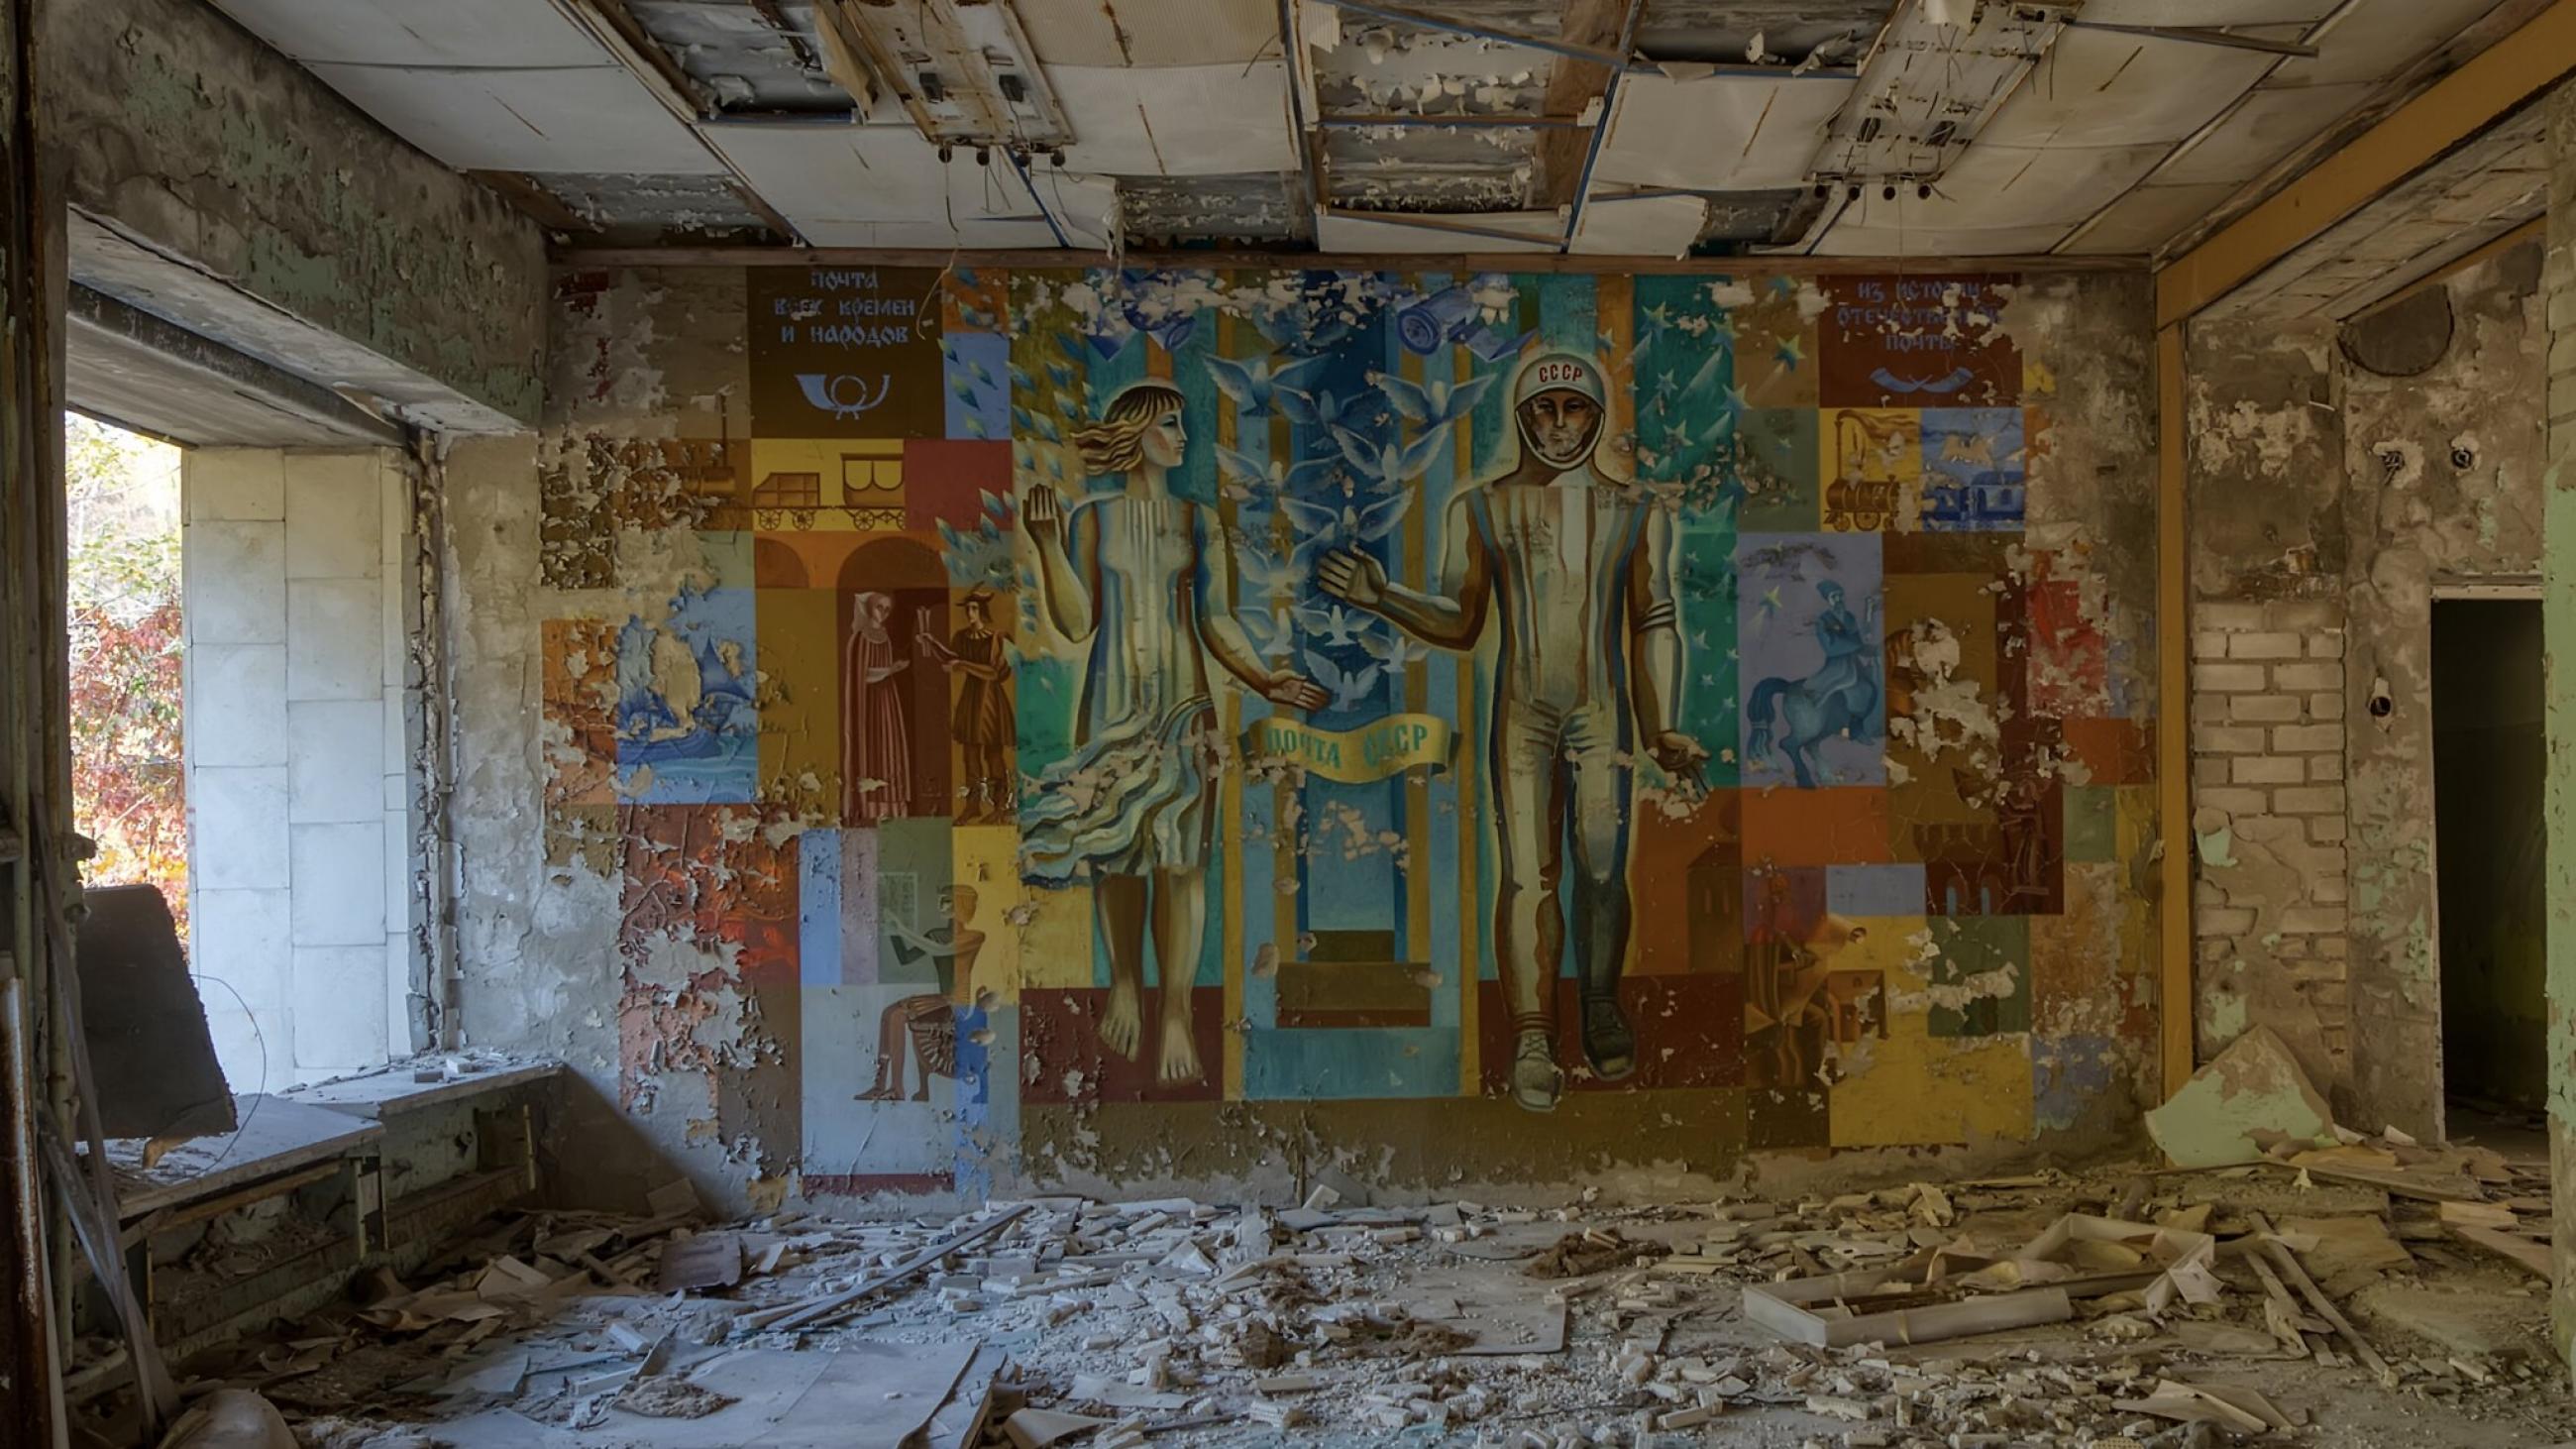 A chipping mural depicts a Soviet Kosmonaut and a woman of science on wall of a decaying building. The floor is littered with grey rubble and the ceiling tiles are cracked and falling. 